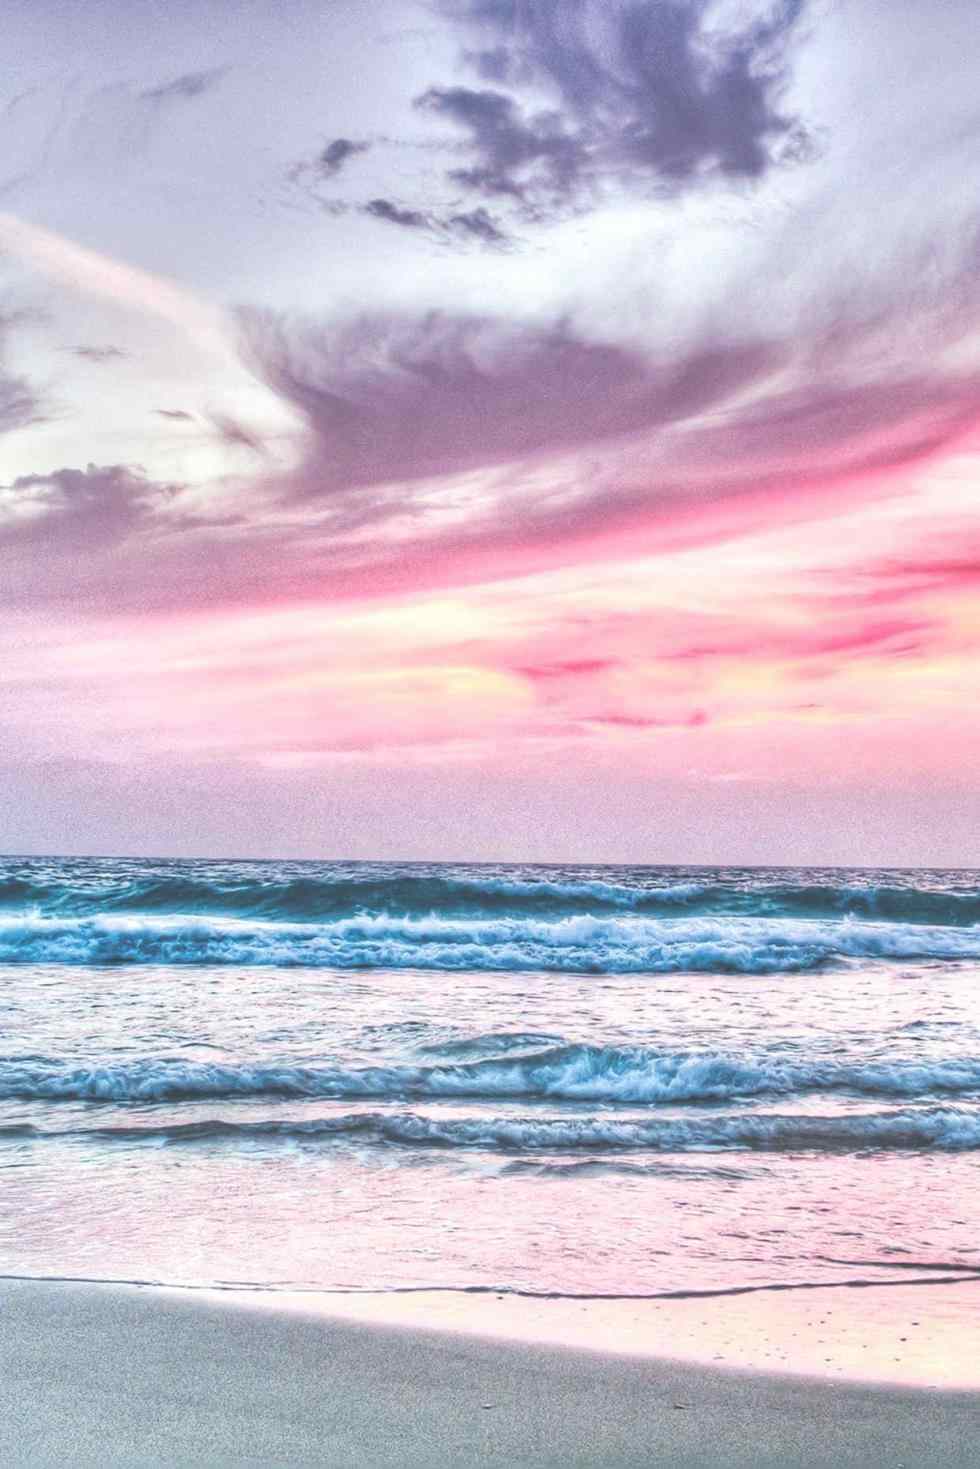 Pink Beach Sunset Iphone Wallpapers